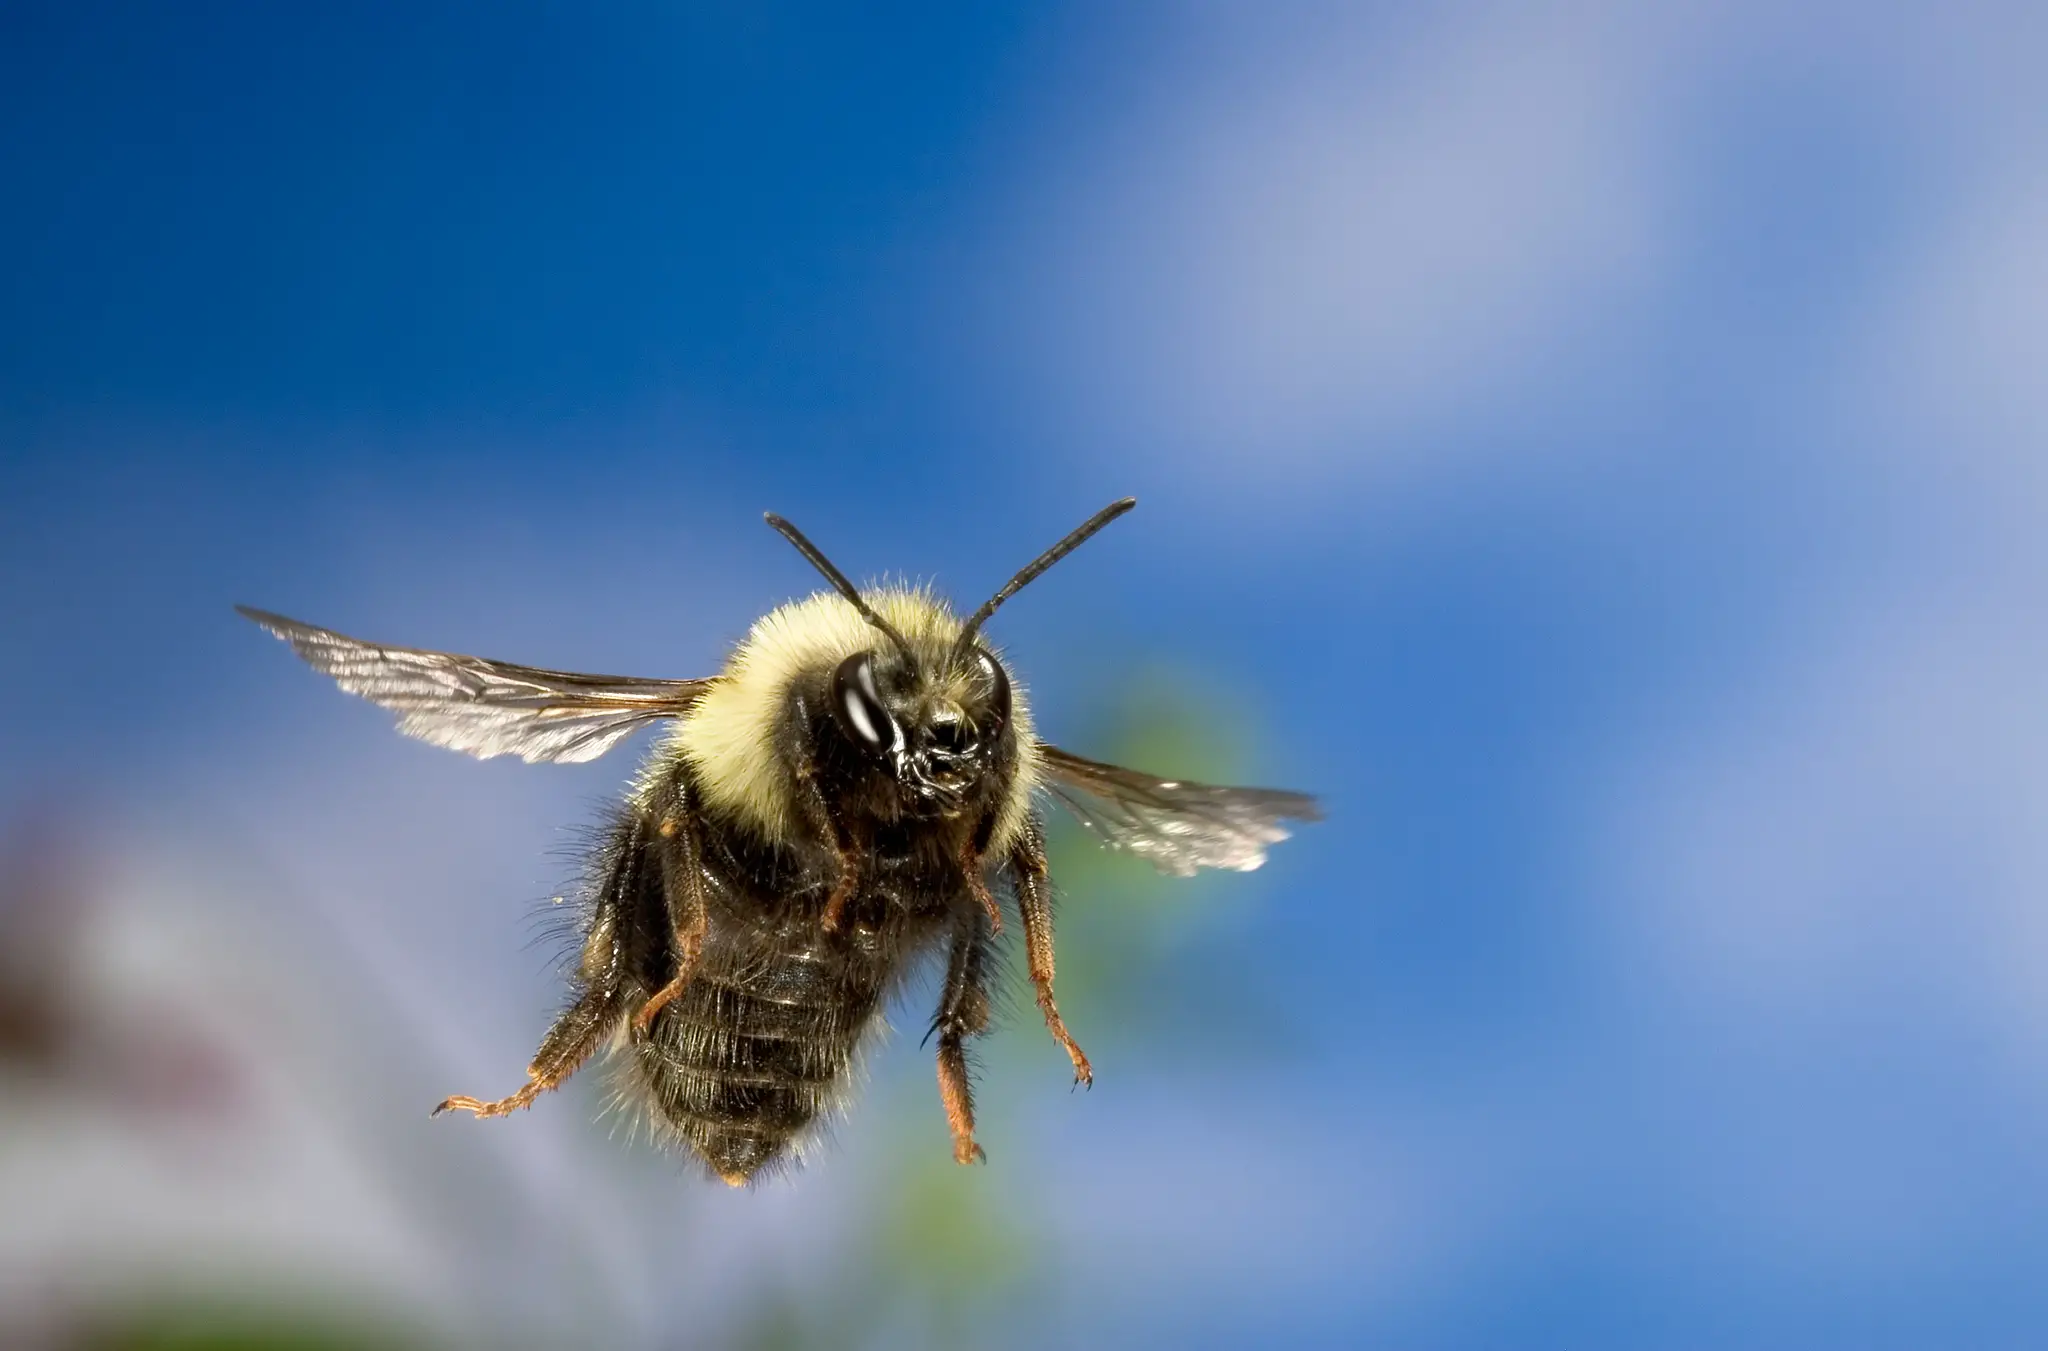 how high can bees fly?